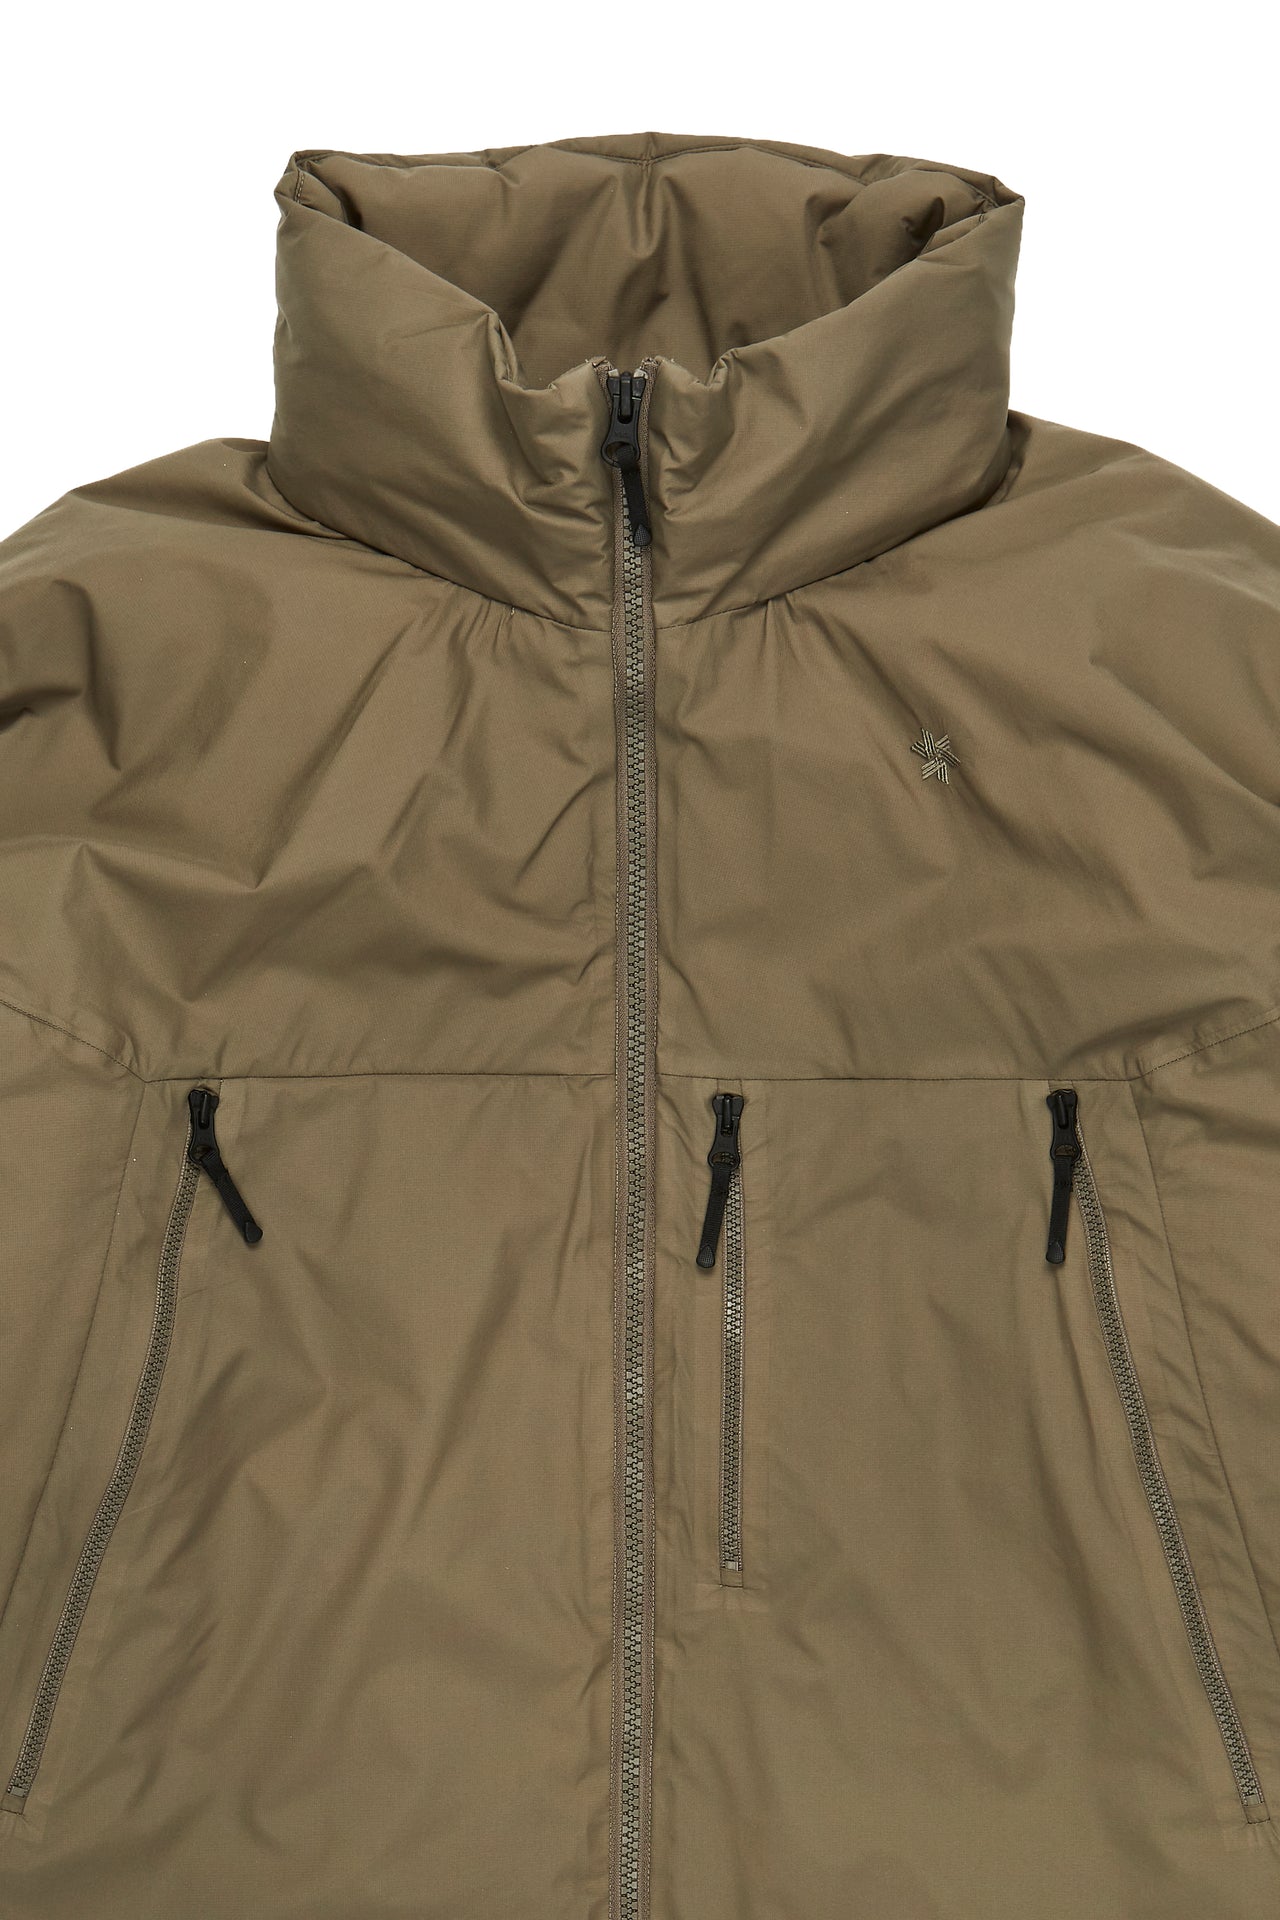 Goldwin Men's GORE-TEX WINDSTOPPER Puffy Mil Jacket - Taupe Grey